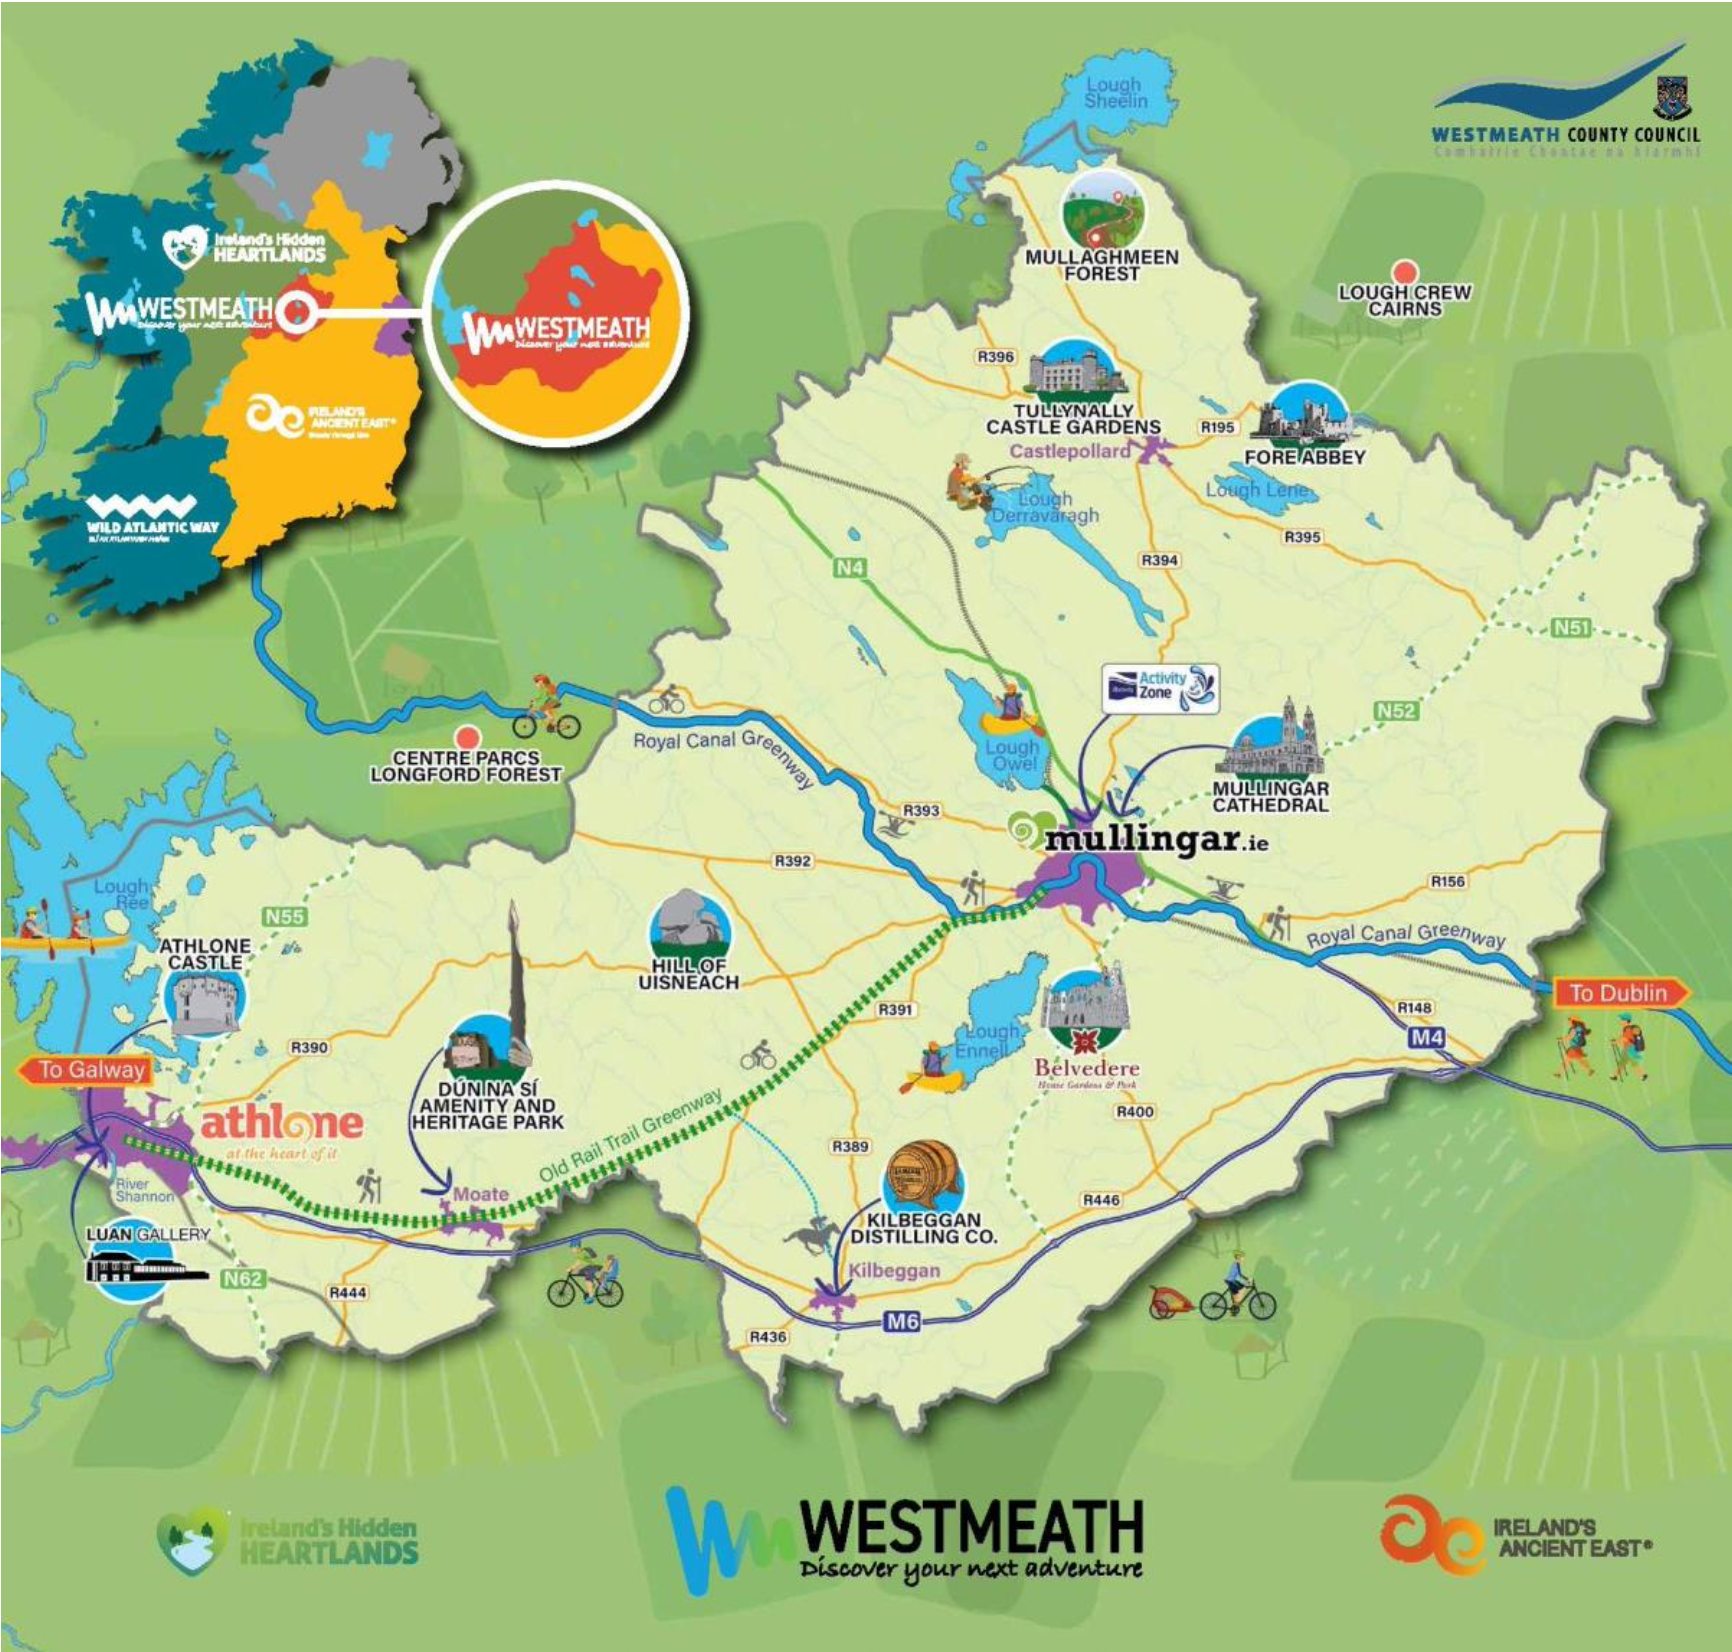 Source: Visit Westmeath Map Guide, www.visitwestmeath.ie, 2018